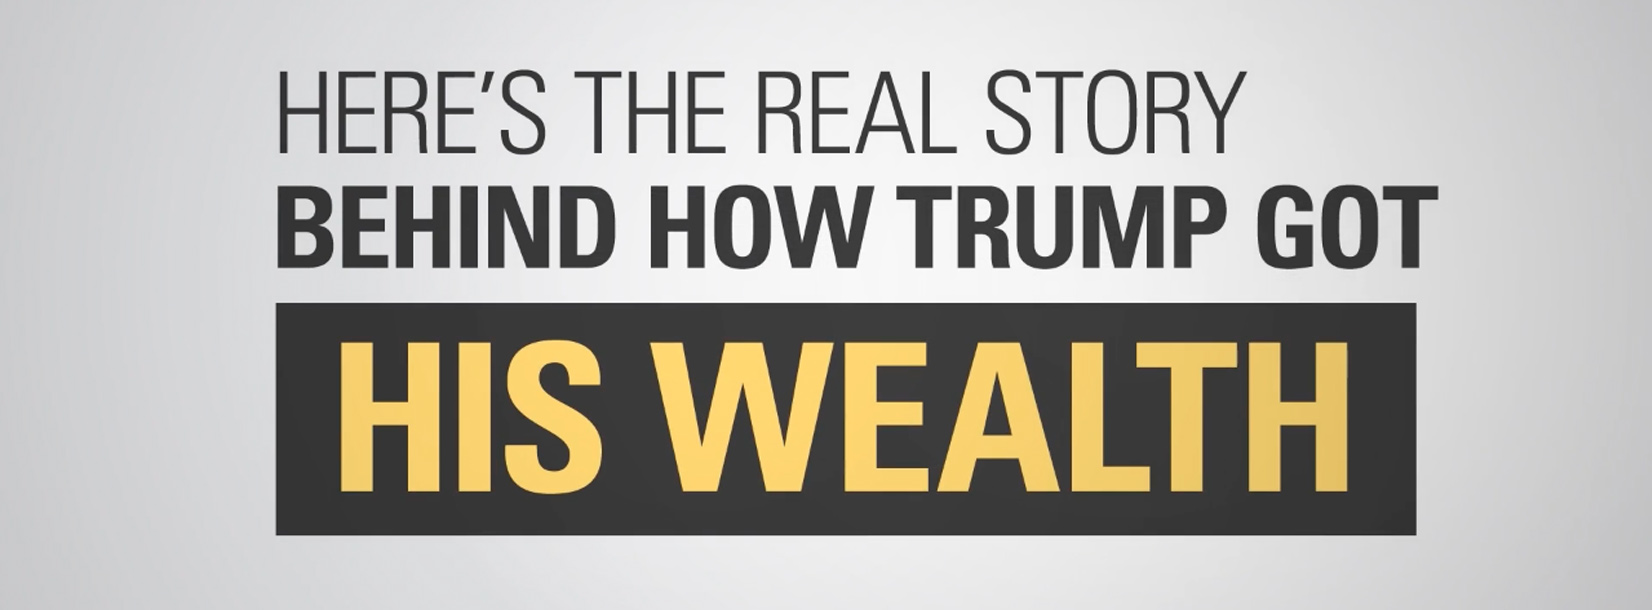 Donald Trump’s Entire Financial History in One Short Video